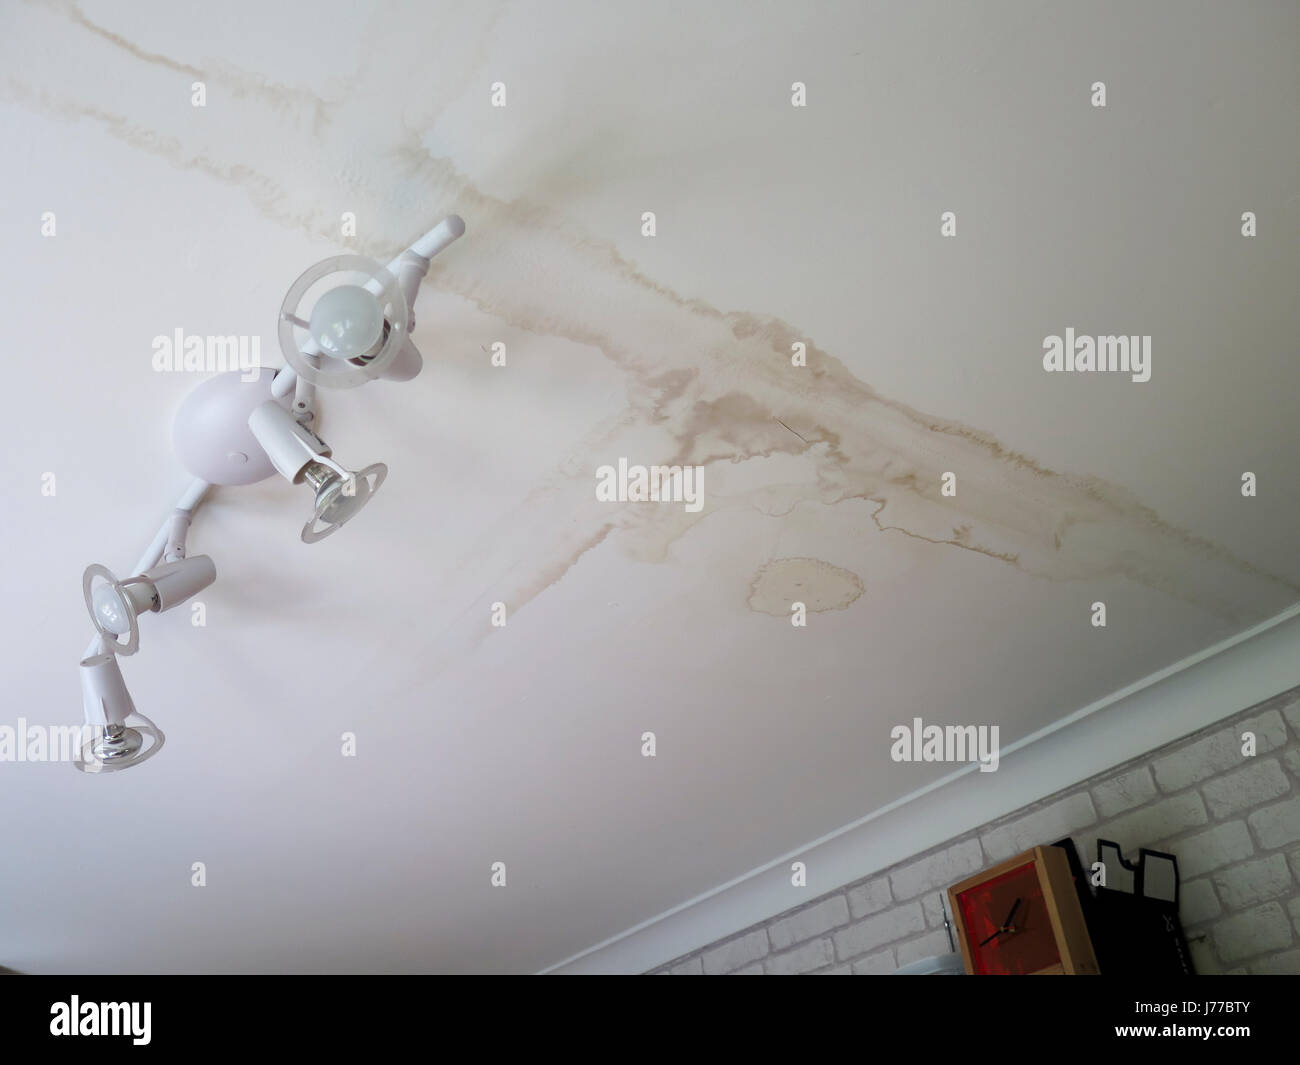 Ceiling Damaged By Leaking Water Stock Photo 142148523 Alamy